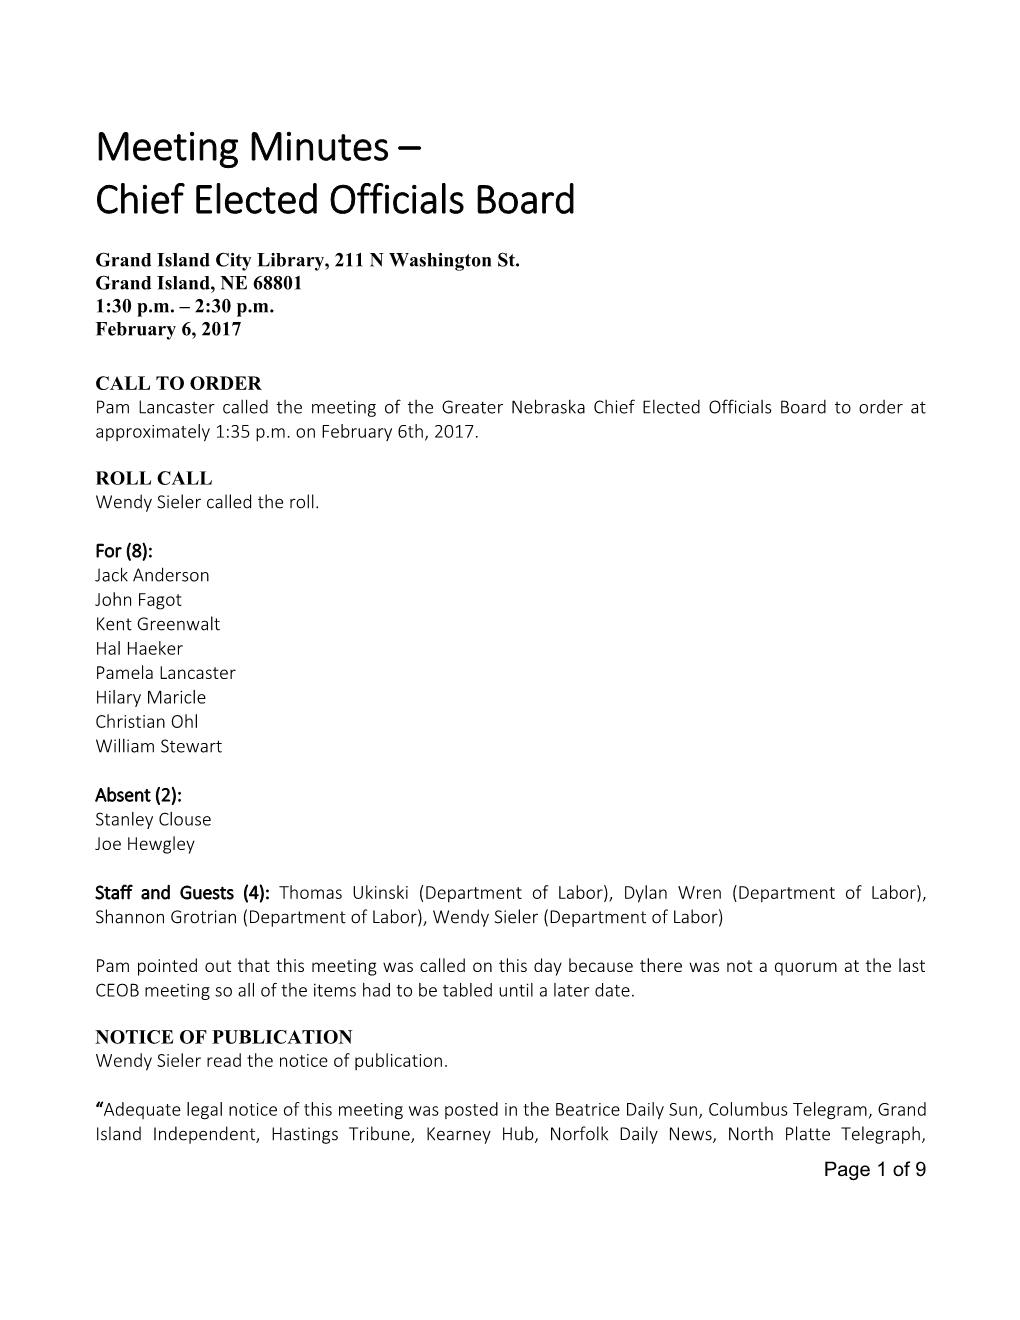 Chief Elected Officials Board